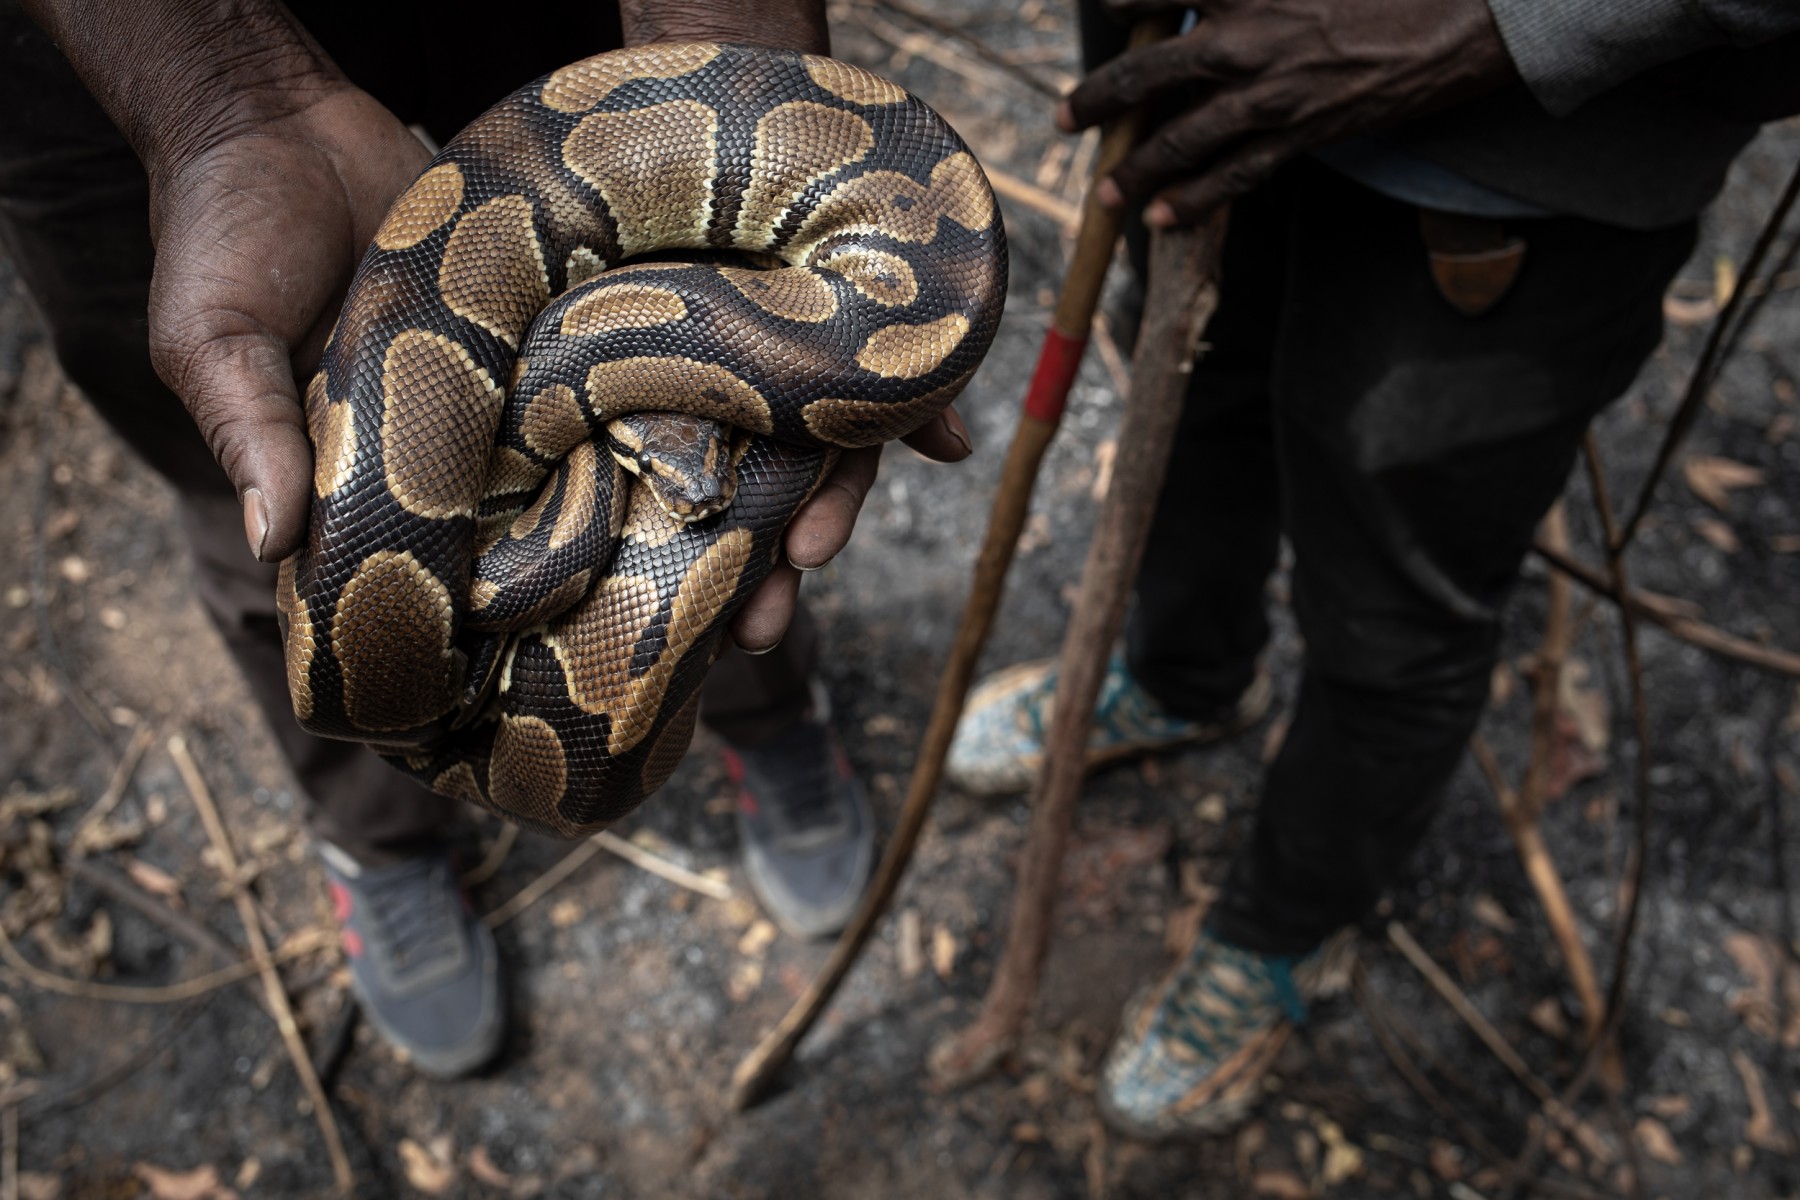 Ball python held by hunter - photo by Aaron Gekoski for World Animal Protection